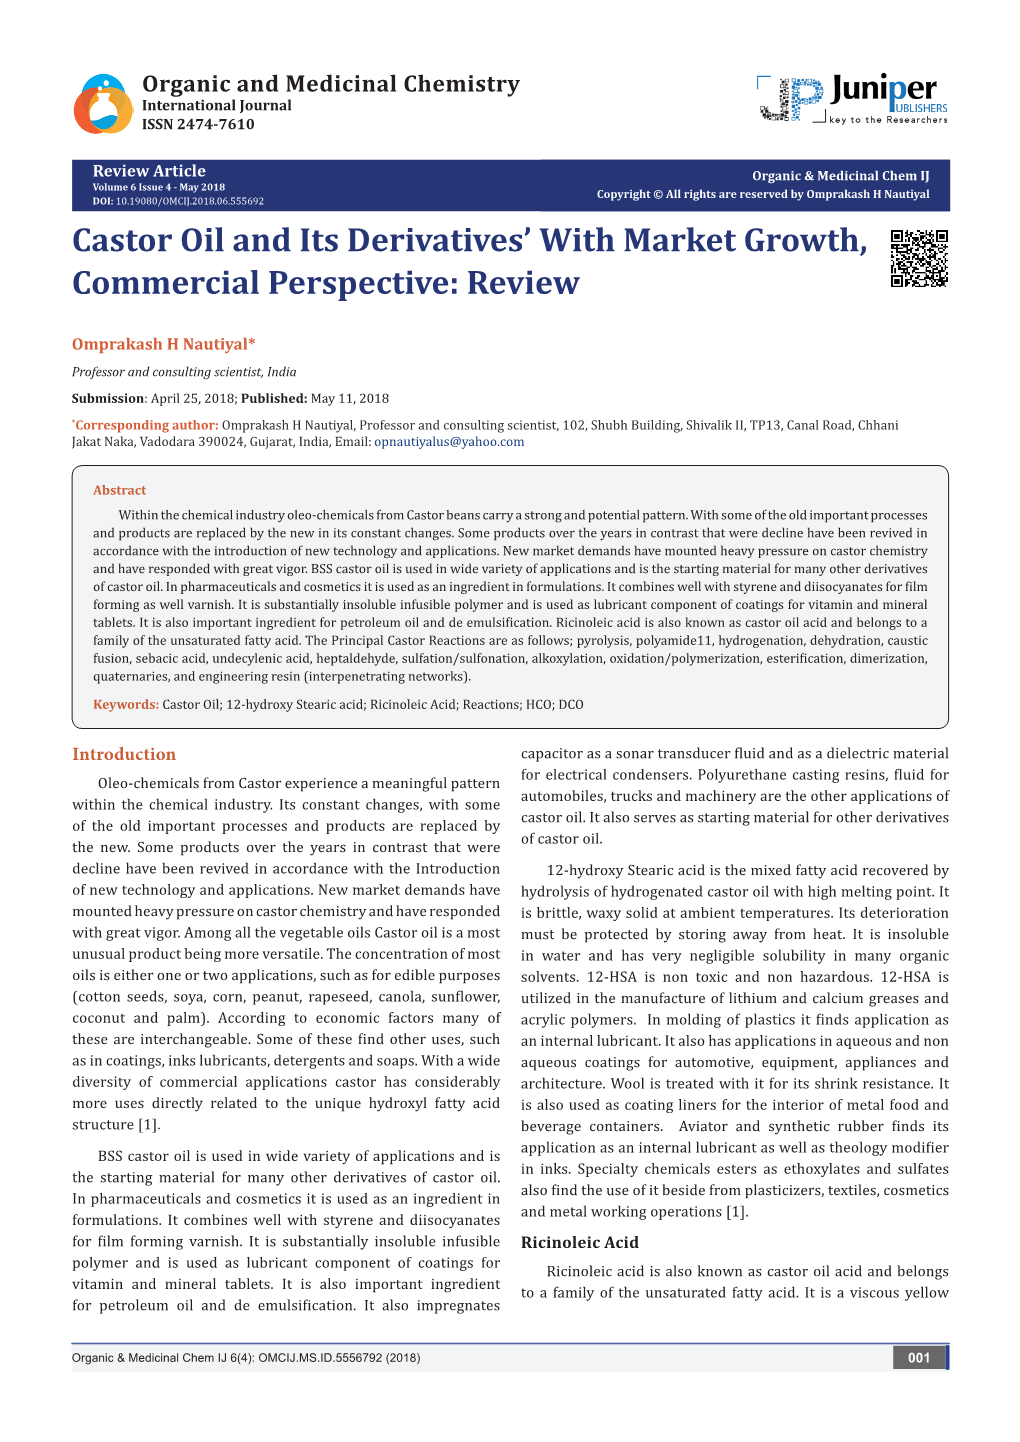 Castor Oil and Its Derivatives' with Market Growth, Commercial Perspective: Review